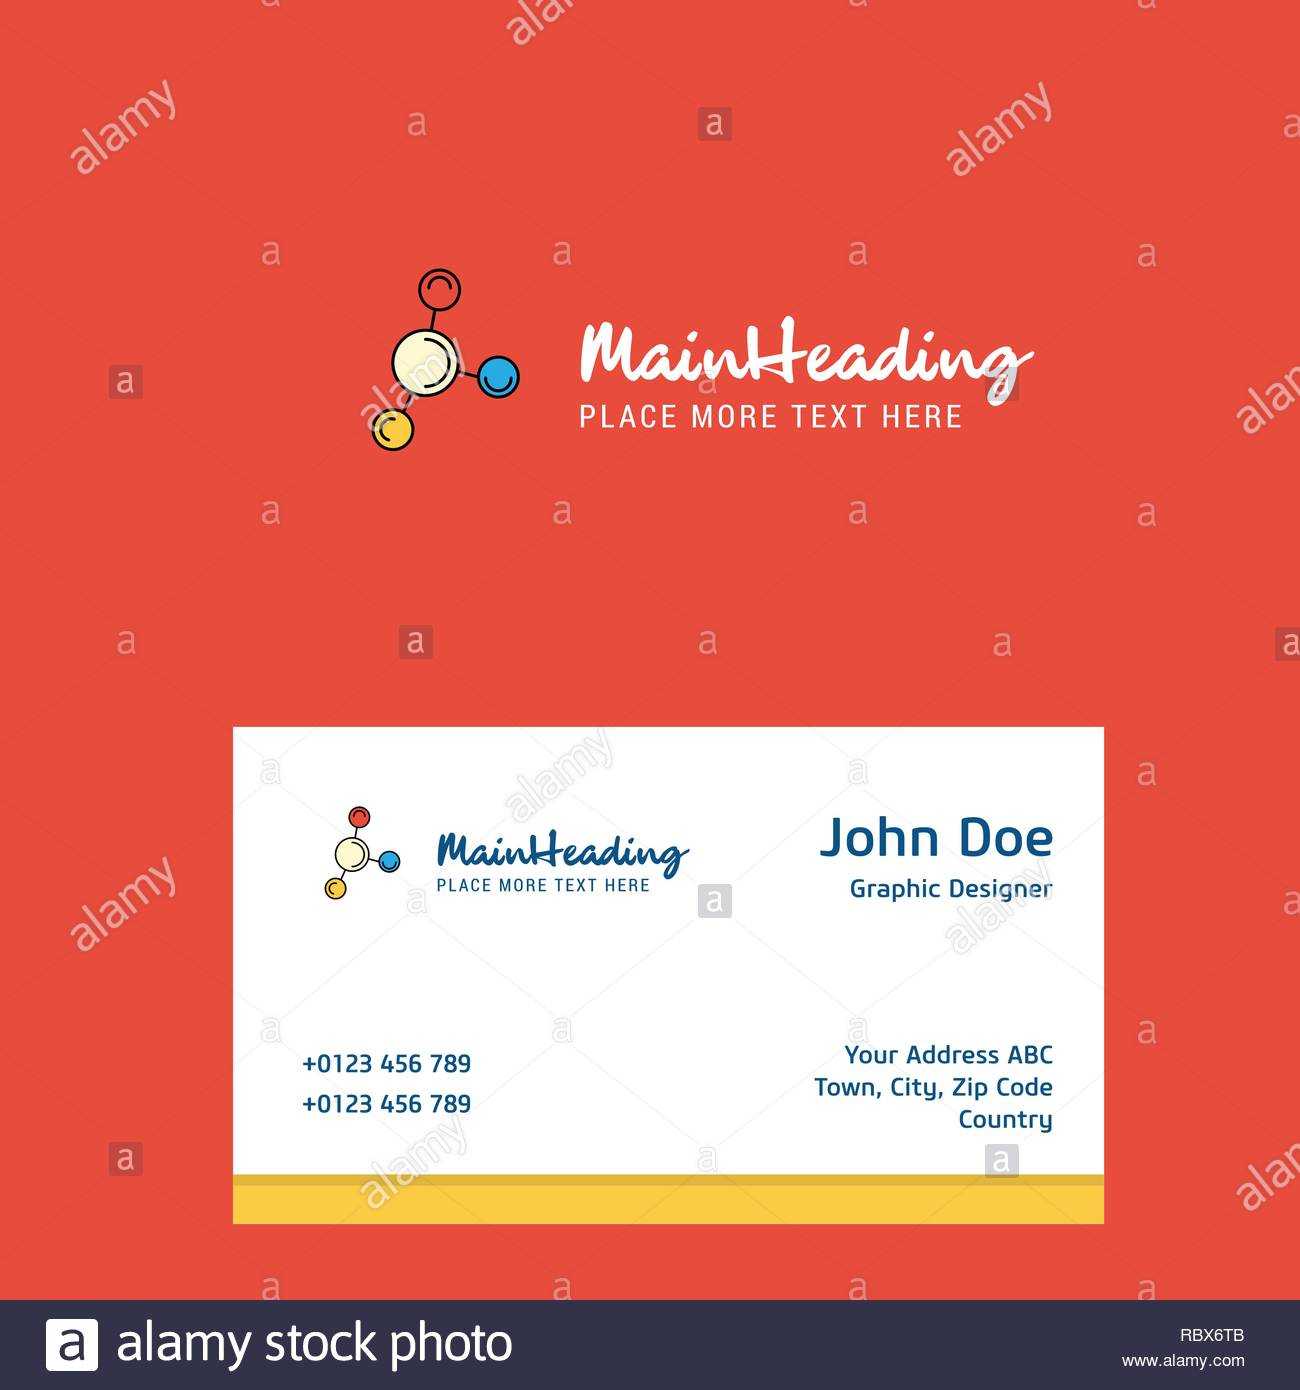 Networking Logo Design With Business Card Template. Elegant With Networking Card Template